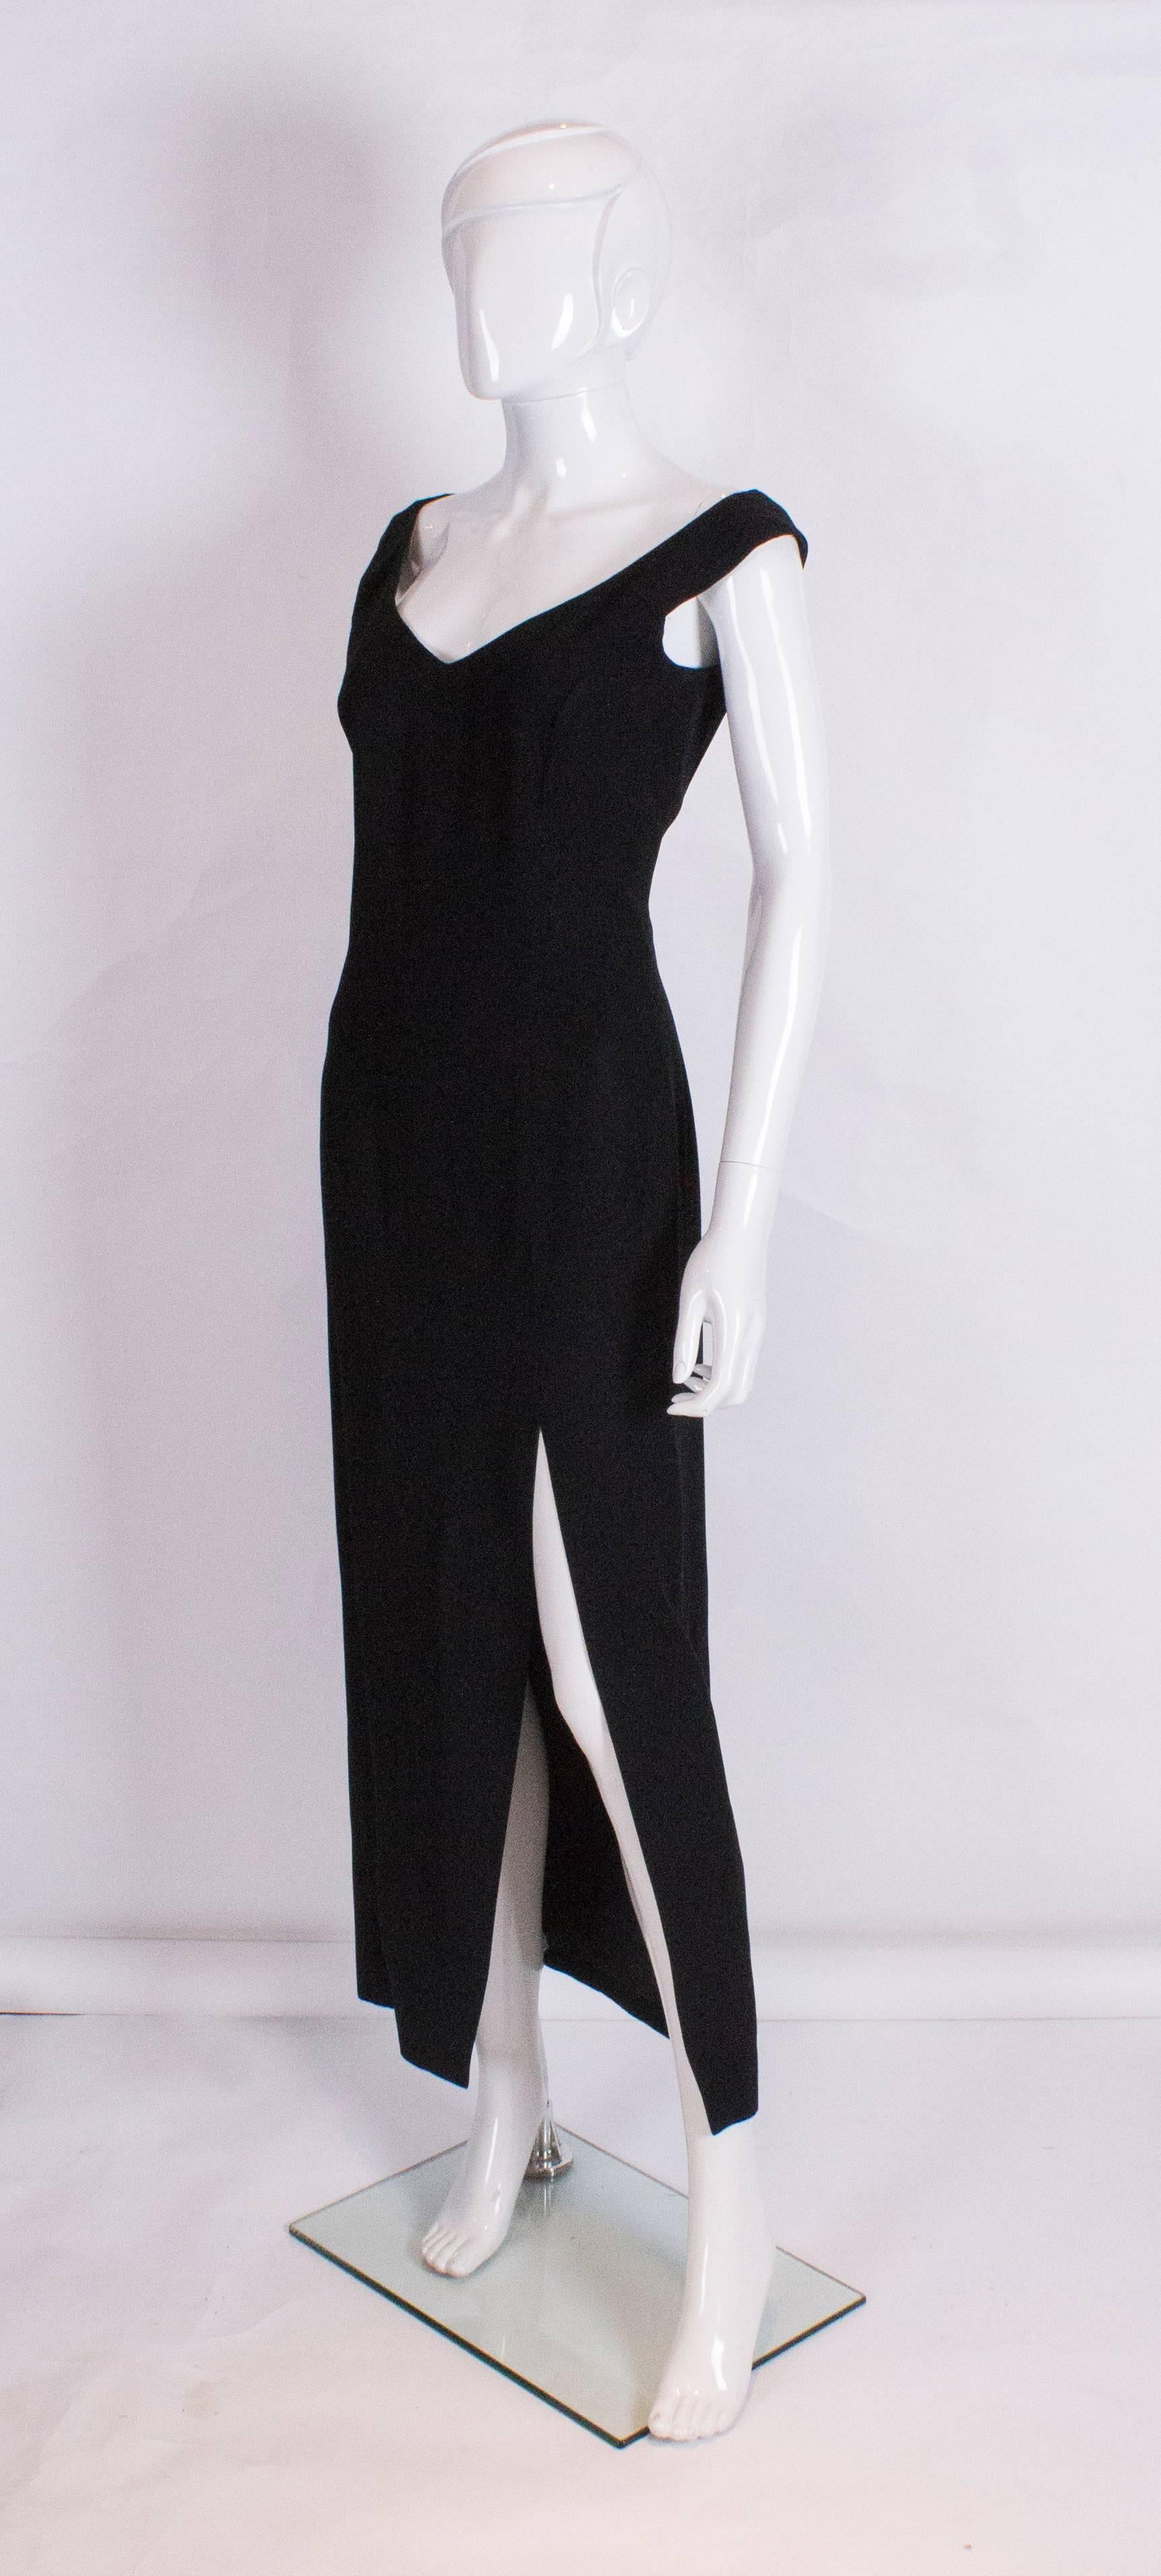 A chic and elegant evening vintage  gown by Jasper Conran .The dress is in a black crepe with an off the shoulder neckline and 23'' slit at the front. It has a central back zip and is fully lined.